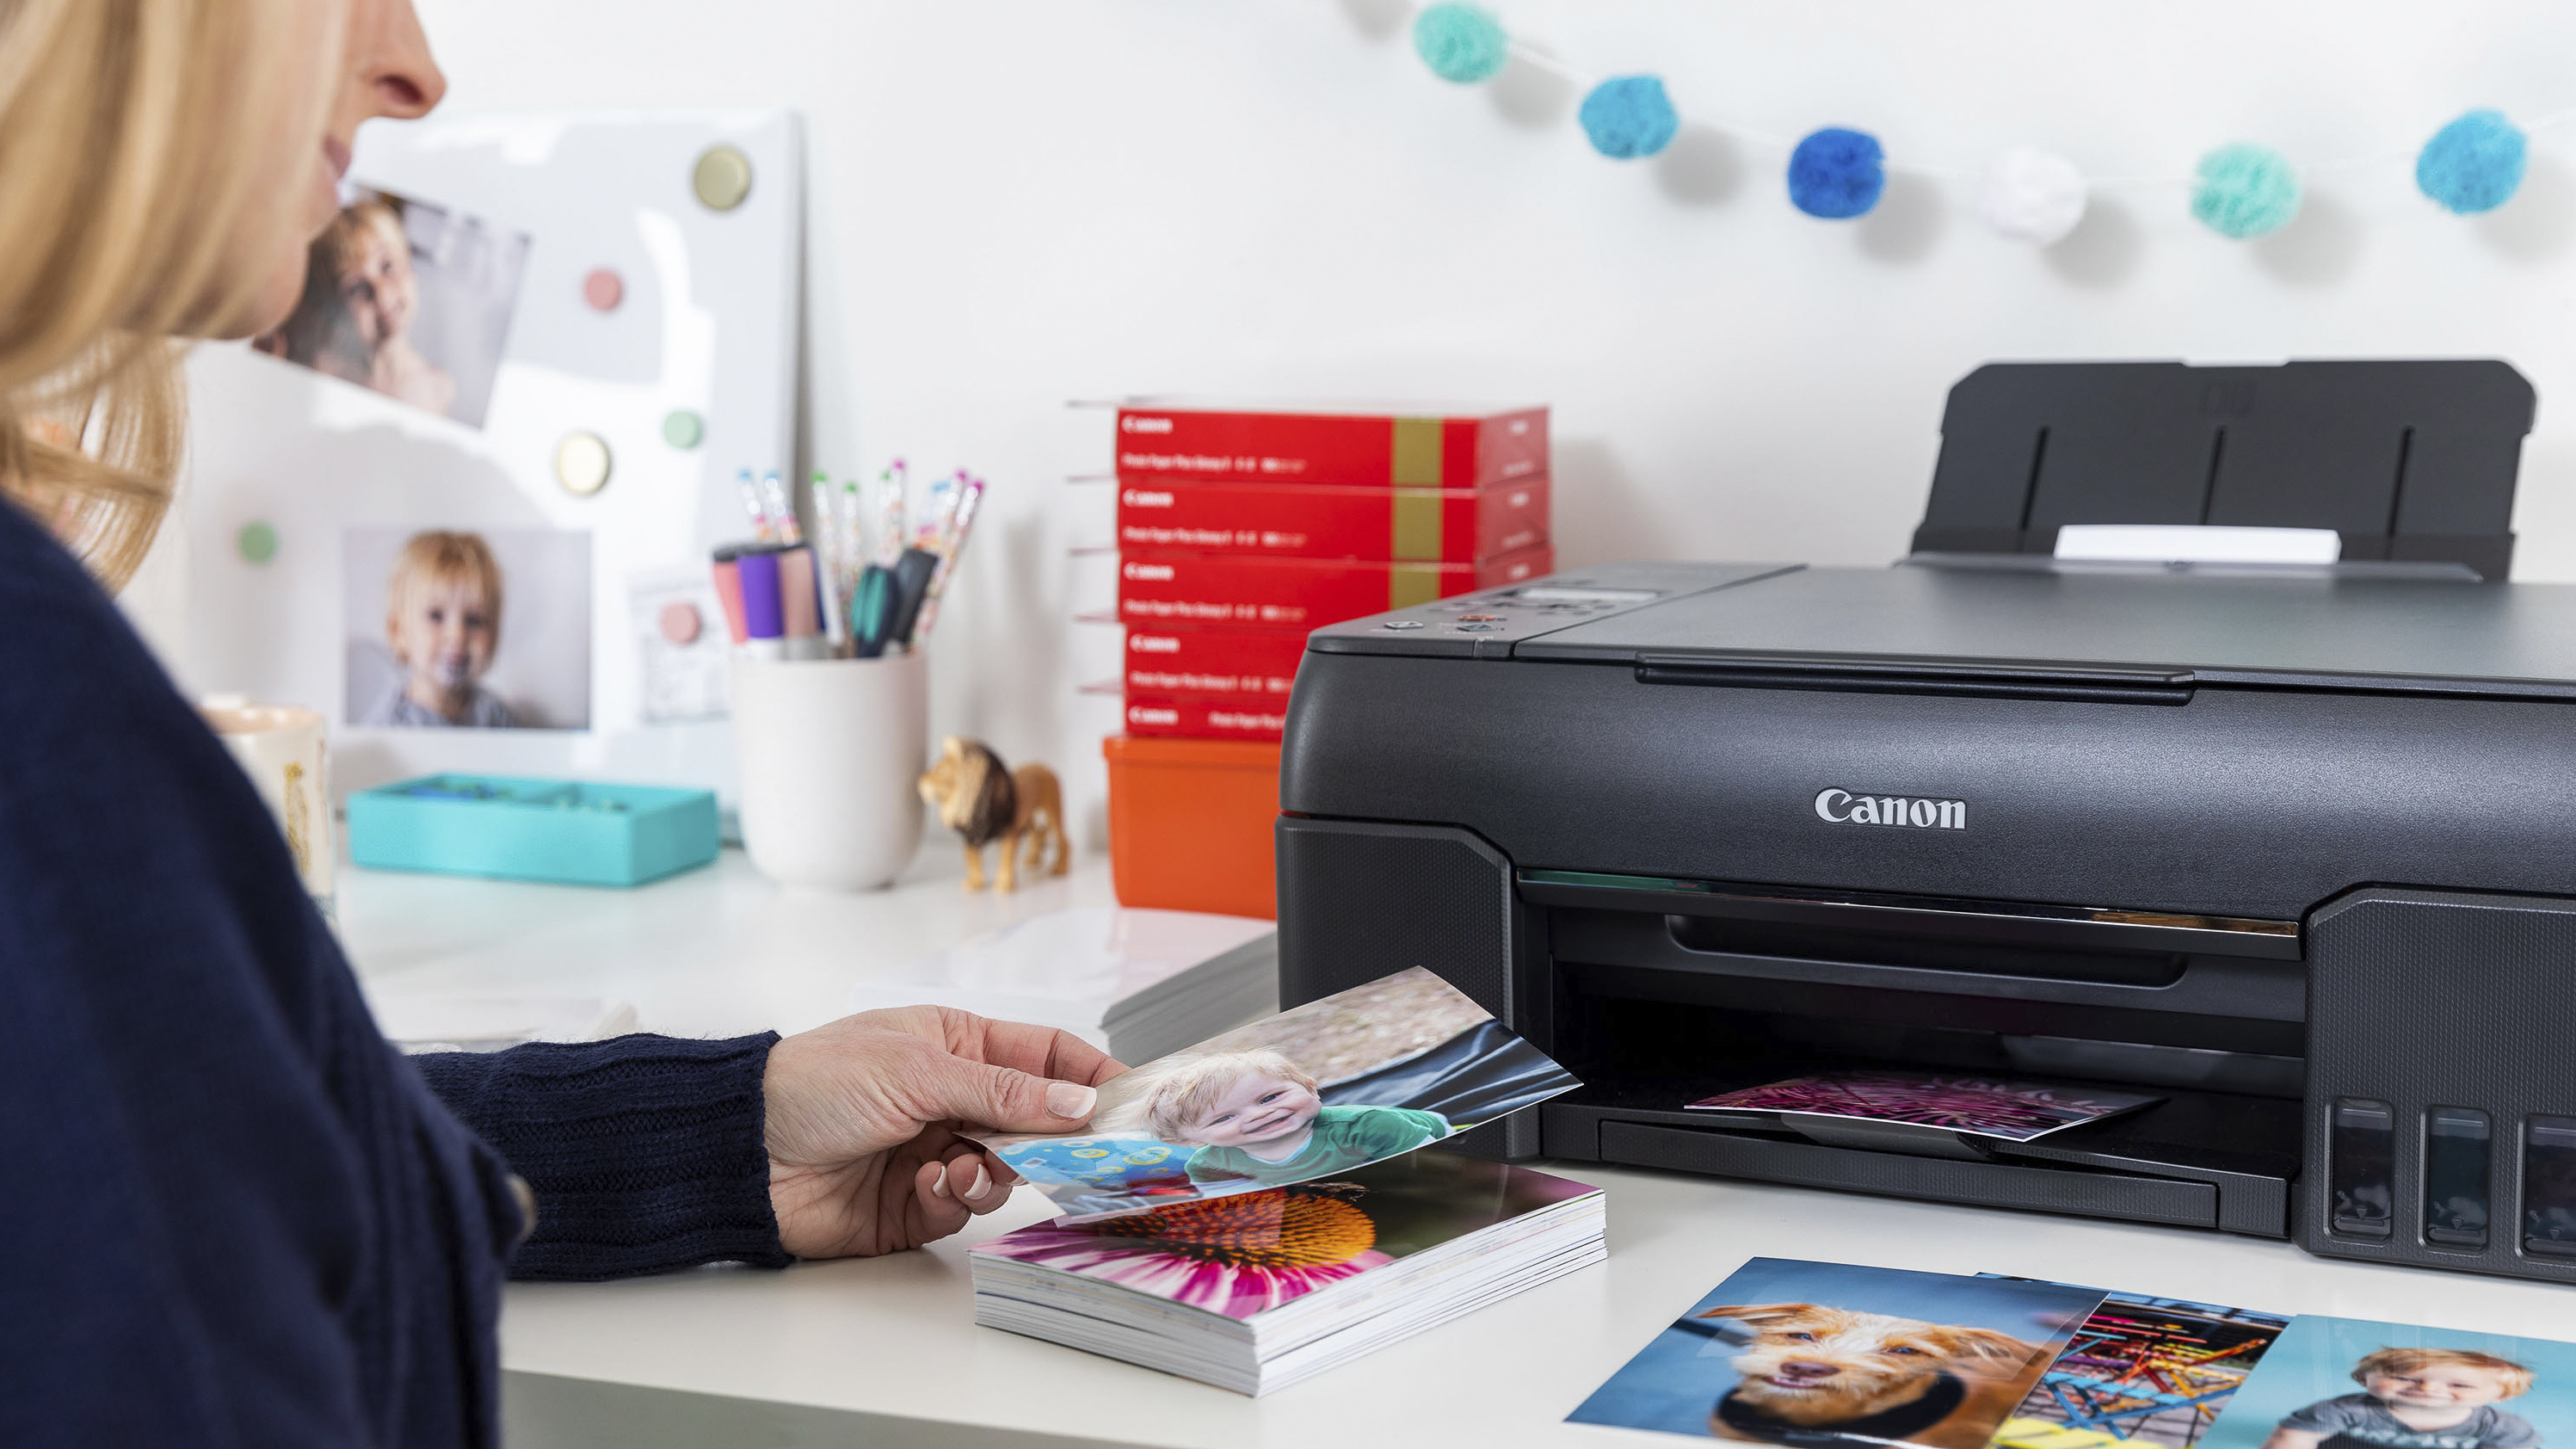 The best photo printer in 2024